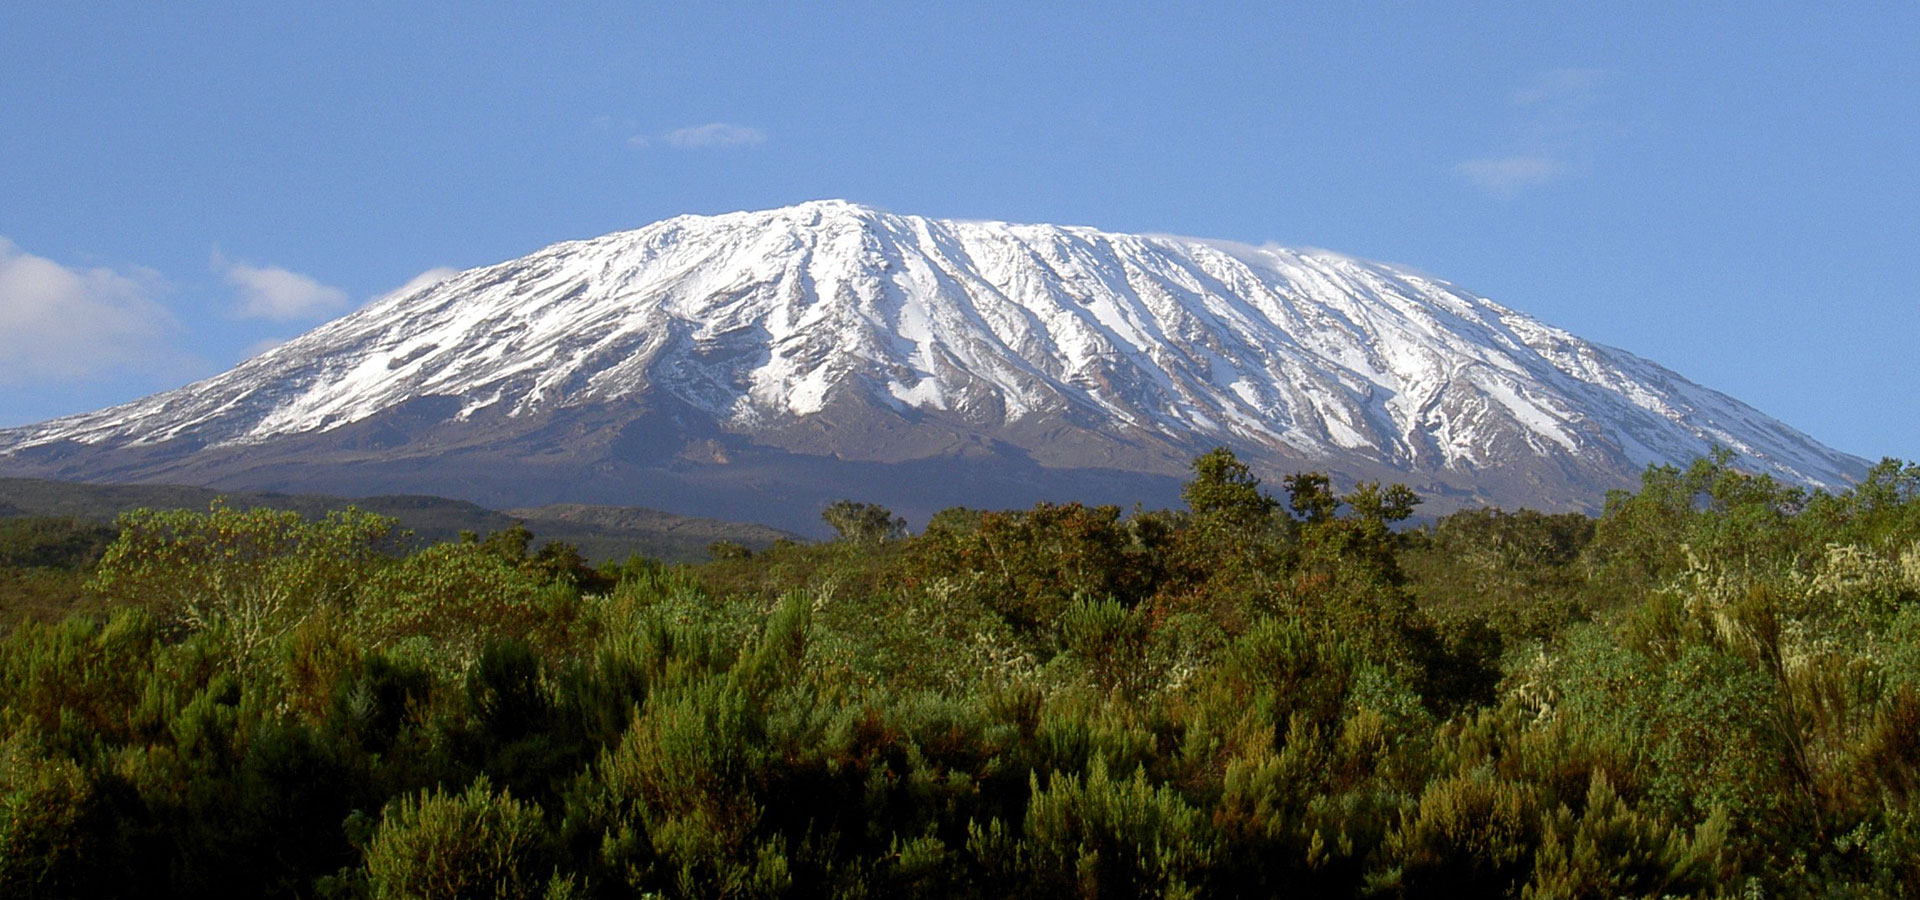 kilimanjaro altitude and how to cover